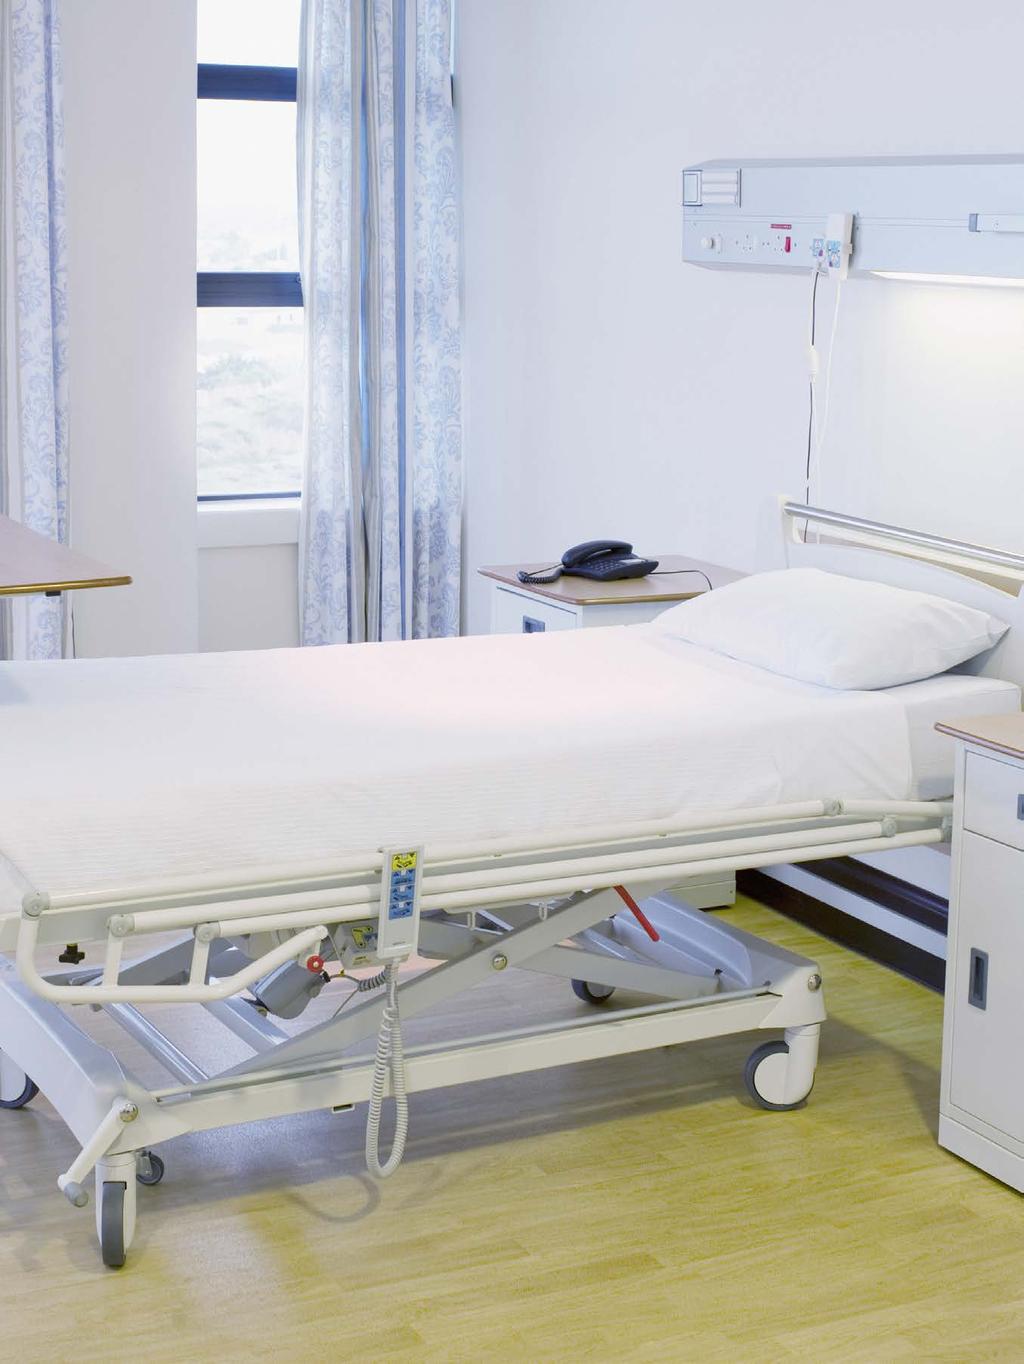 UNC Health Care The Optimum-UV System is effective against methicillin-resistant Staphylococcus aureus (MRSA) and C. difficile plated on Formica laminate in patient rooms.